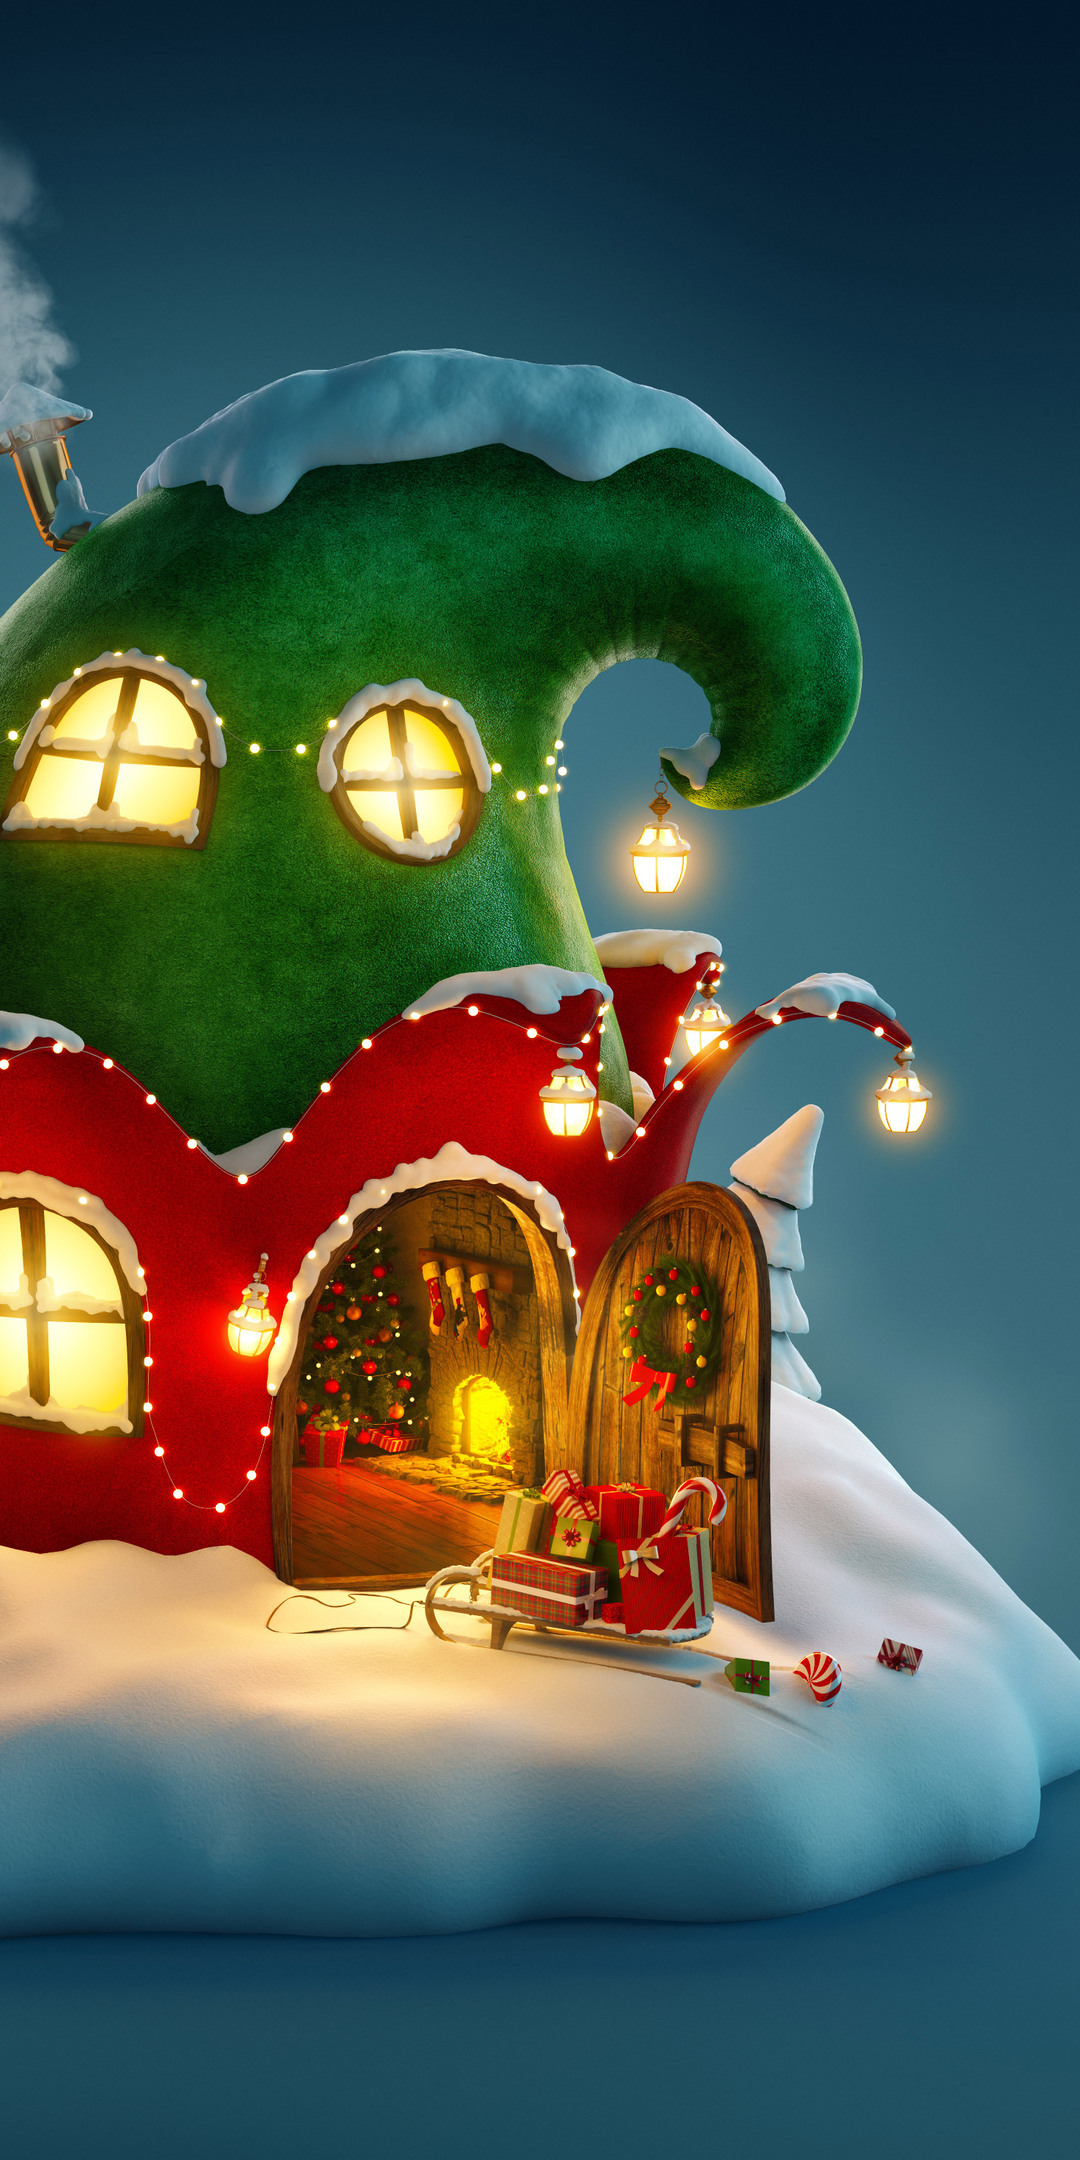 1080x2160 Christmas Fairy House 4k One Plus 5T,Honor 7x,Honor view 10 ...